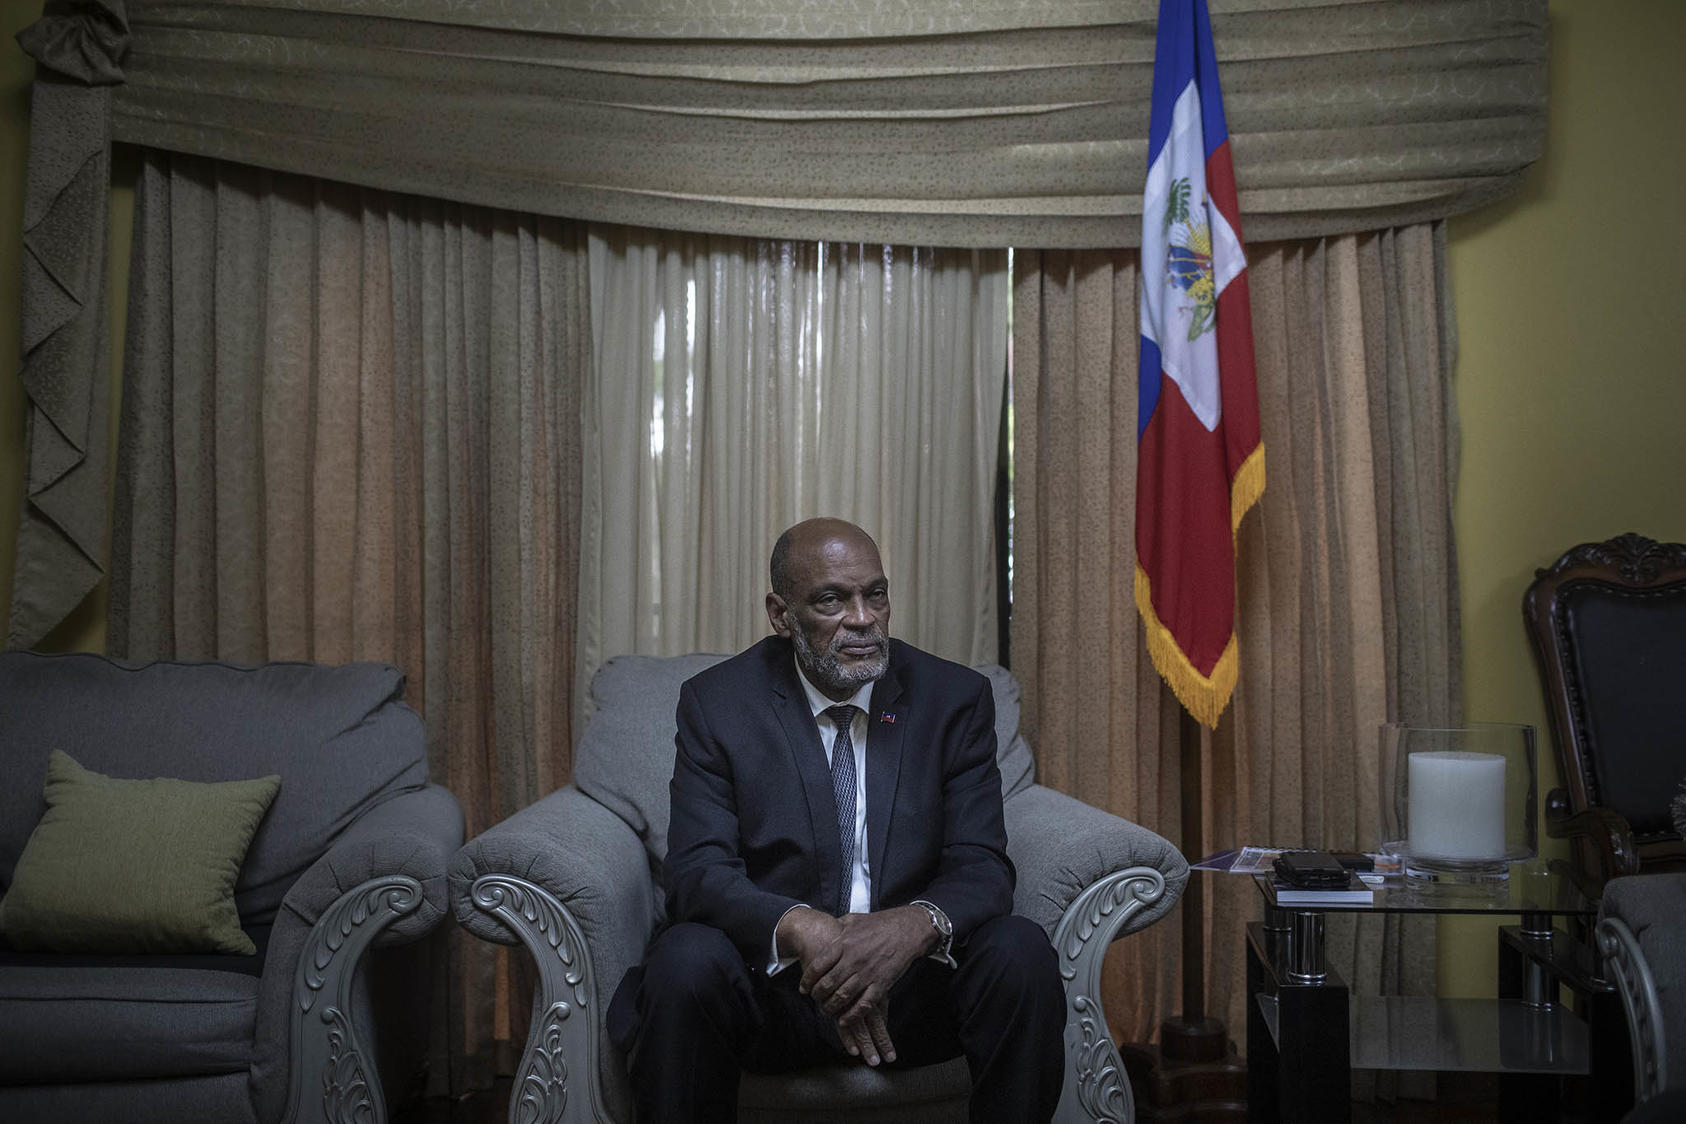 Haitian Prime Minister Ariel Henry seen here at his residence in Port-au-Prince on Aug. 3, 2021. (Victor Moriyama/The New York Times)